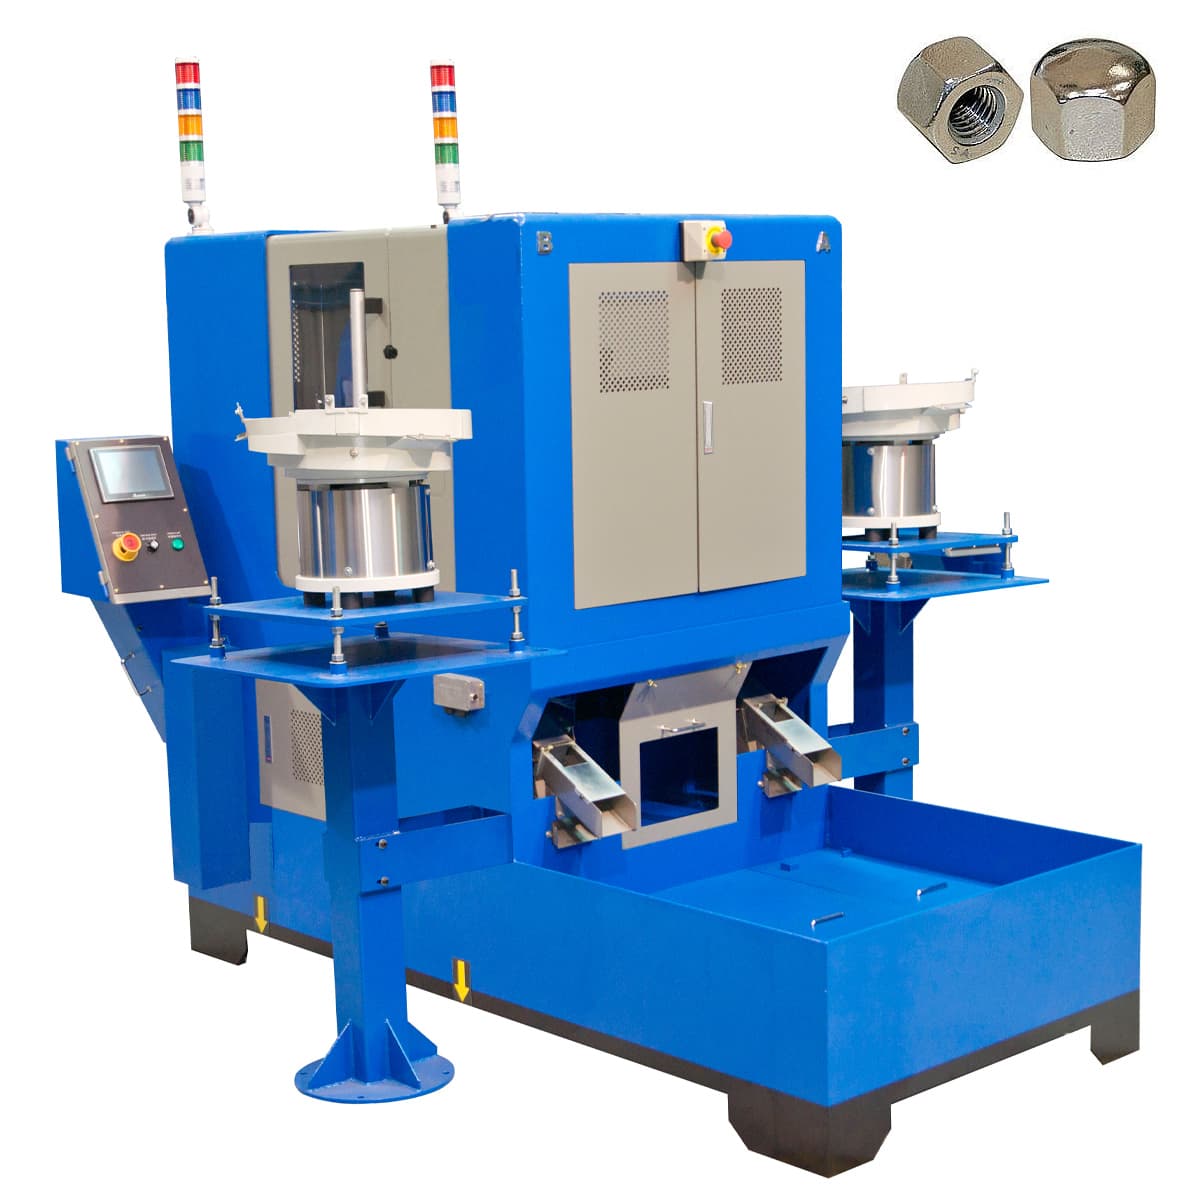 2-spindle tapping machine of shuttle-type